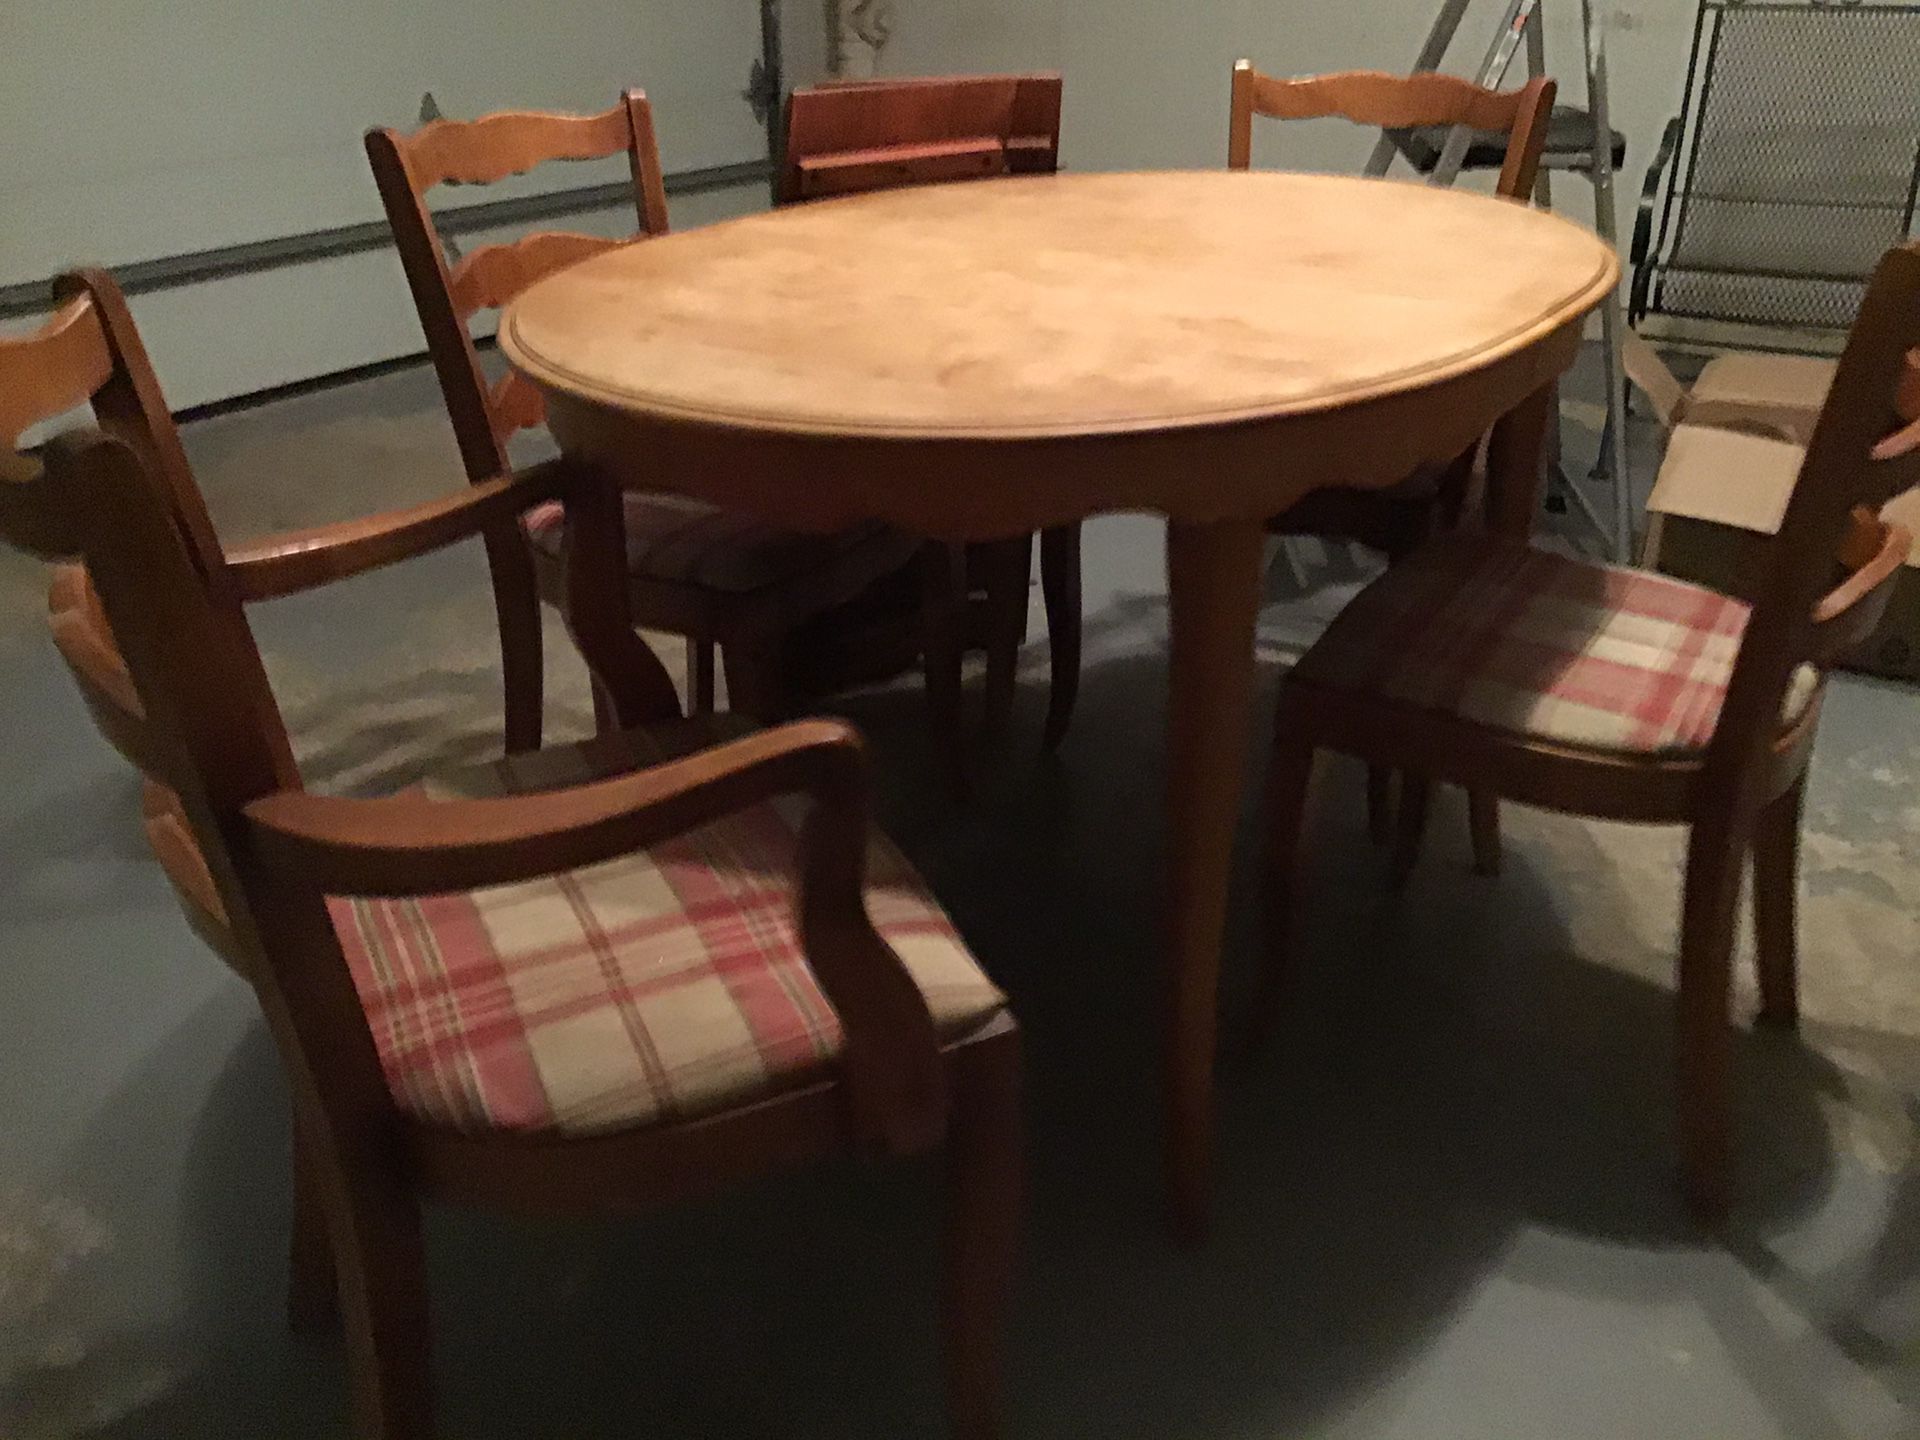 Solid fruit wood dining table and four chairs.